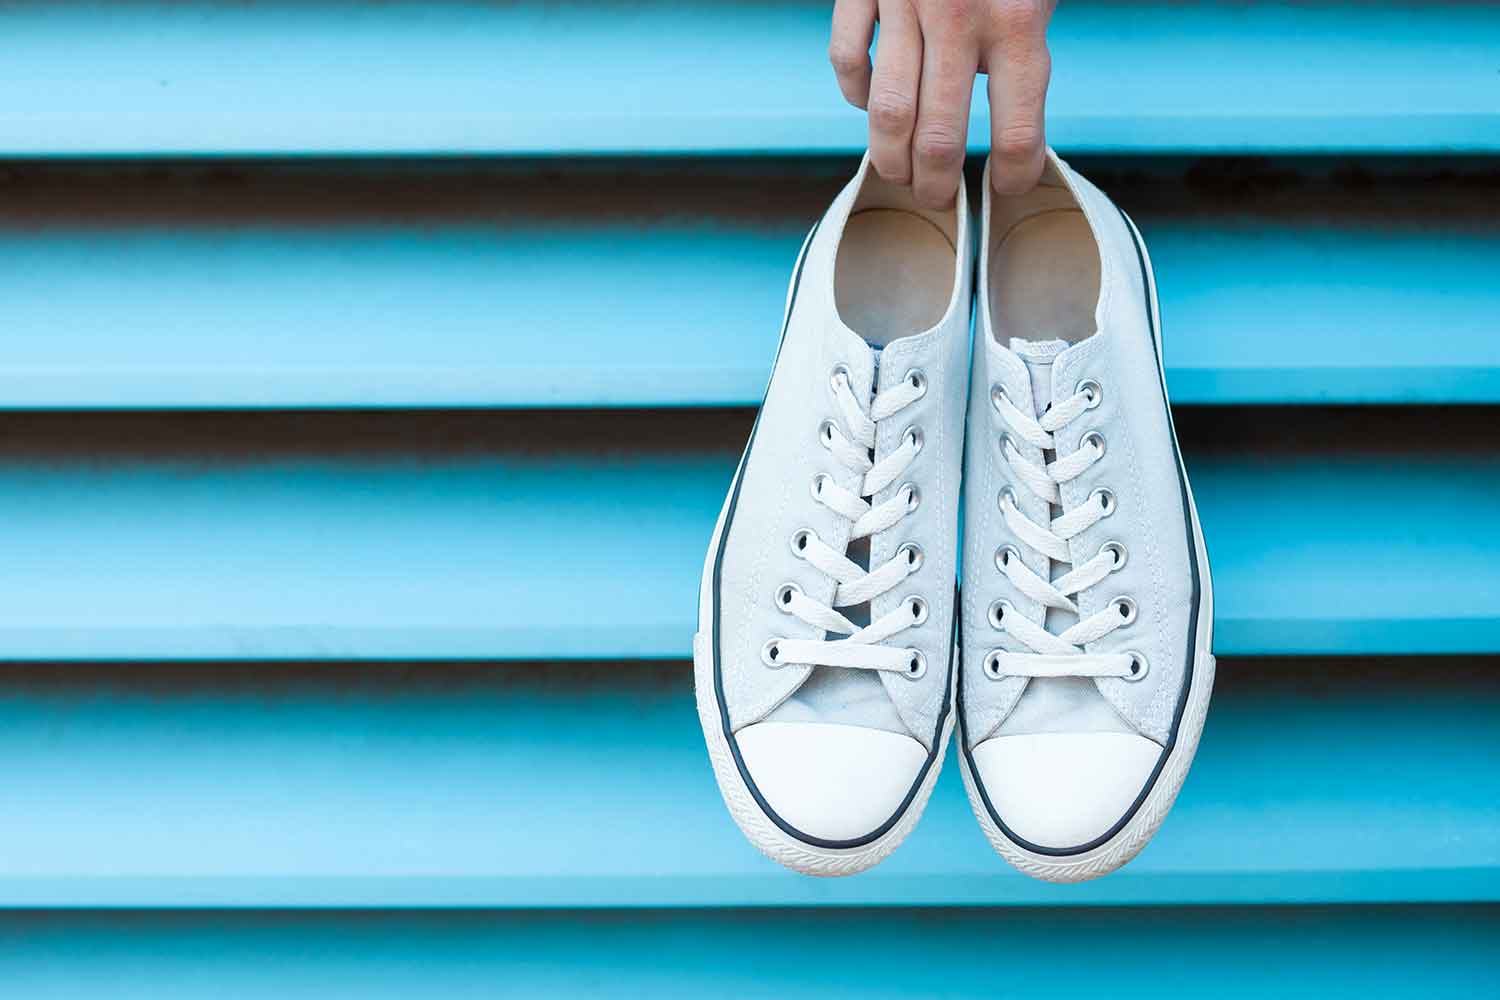 how to get your white sneakers white again